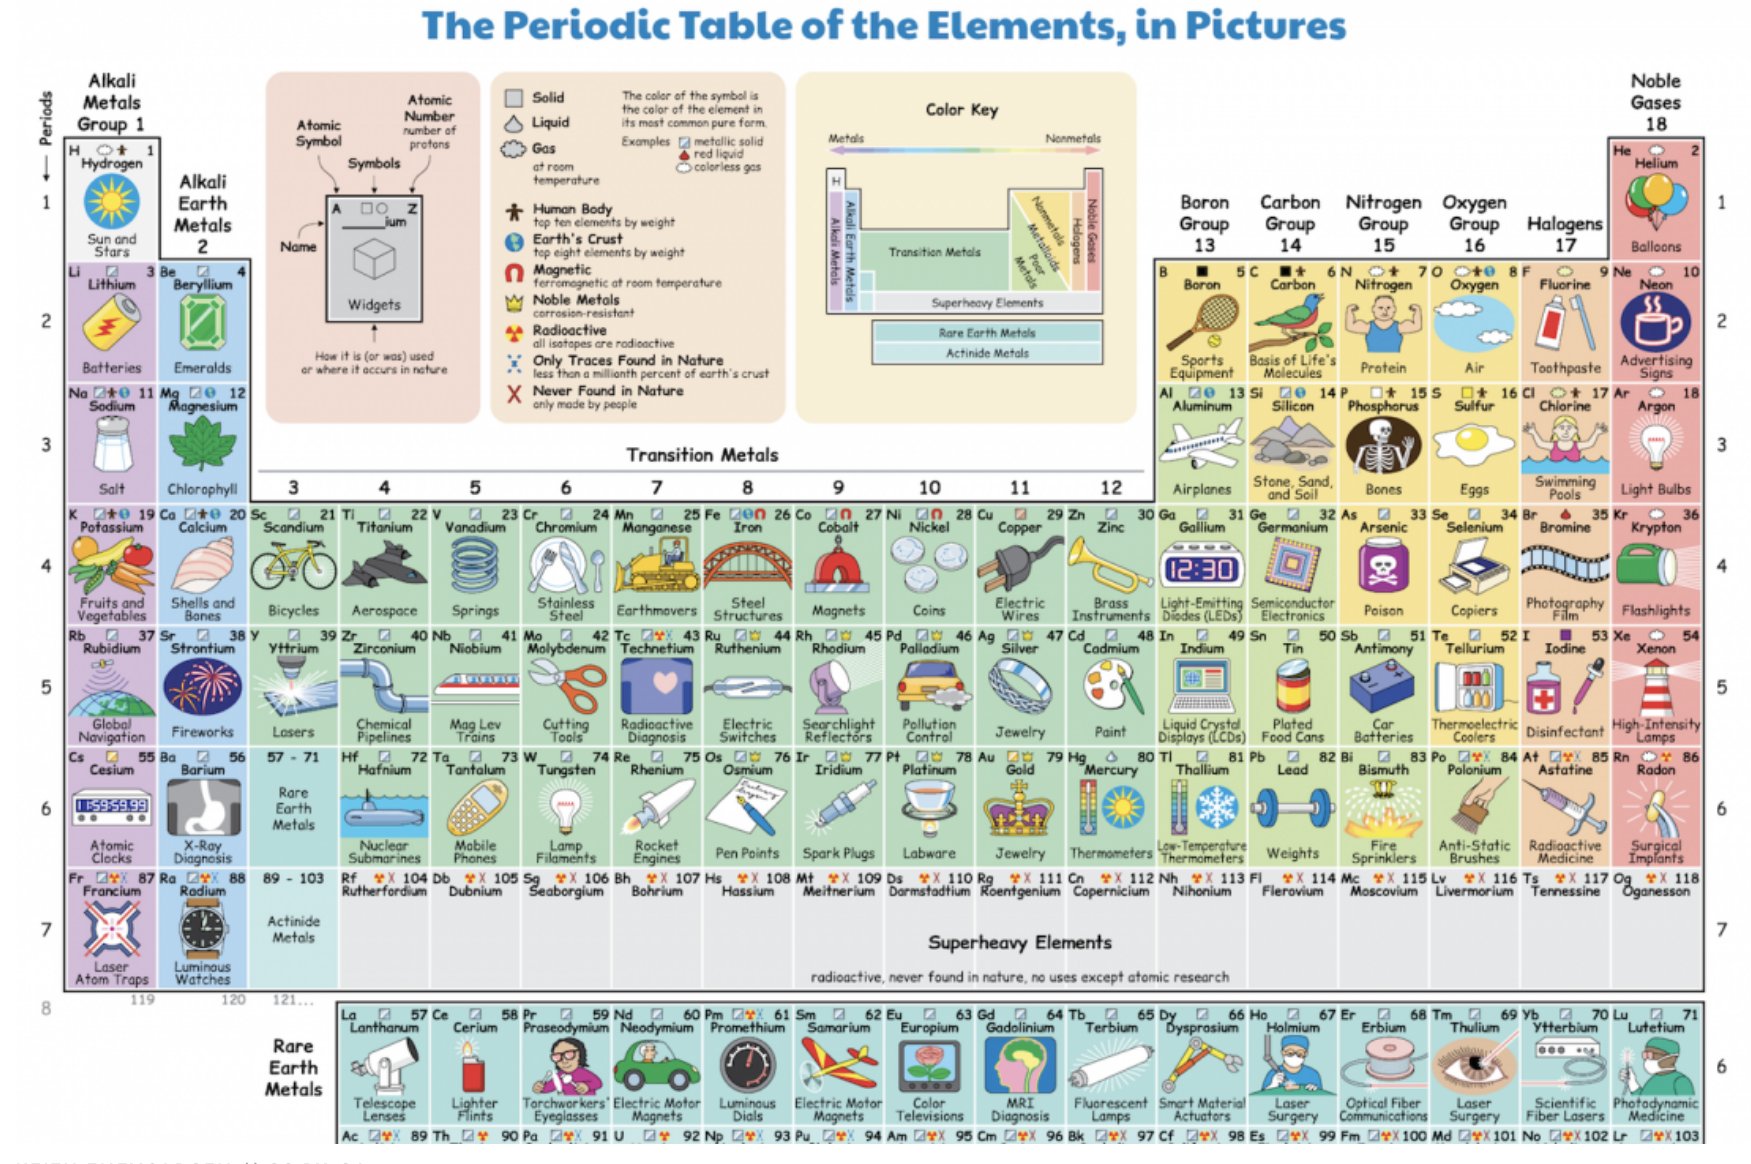 Mental Floss on "This Illustrated Periodic Table Shows How We Regularly Interact Each Element https://t.co/K8QijR6sPO https://t.co/sLeAXLEdQr" / Twitter